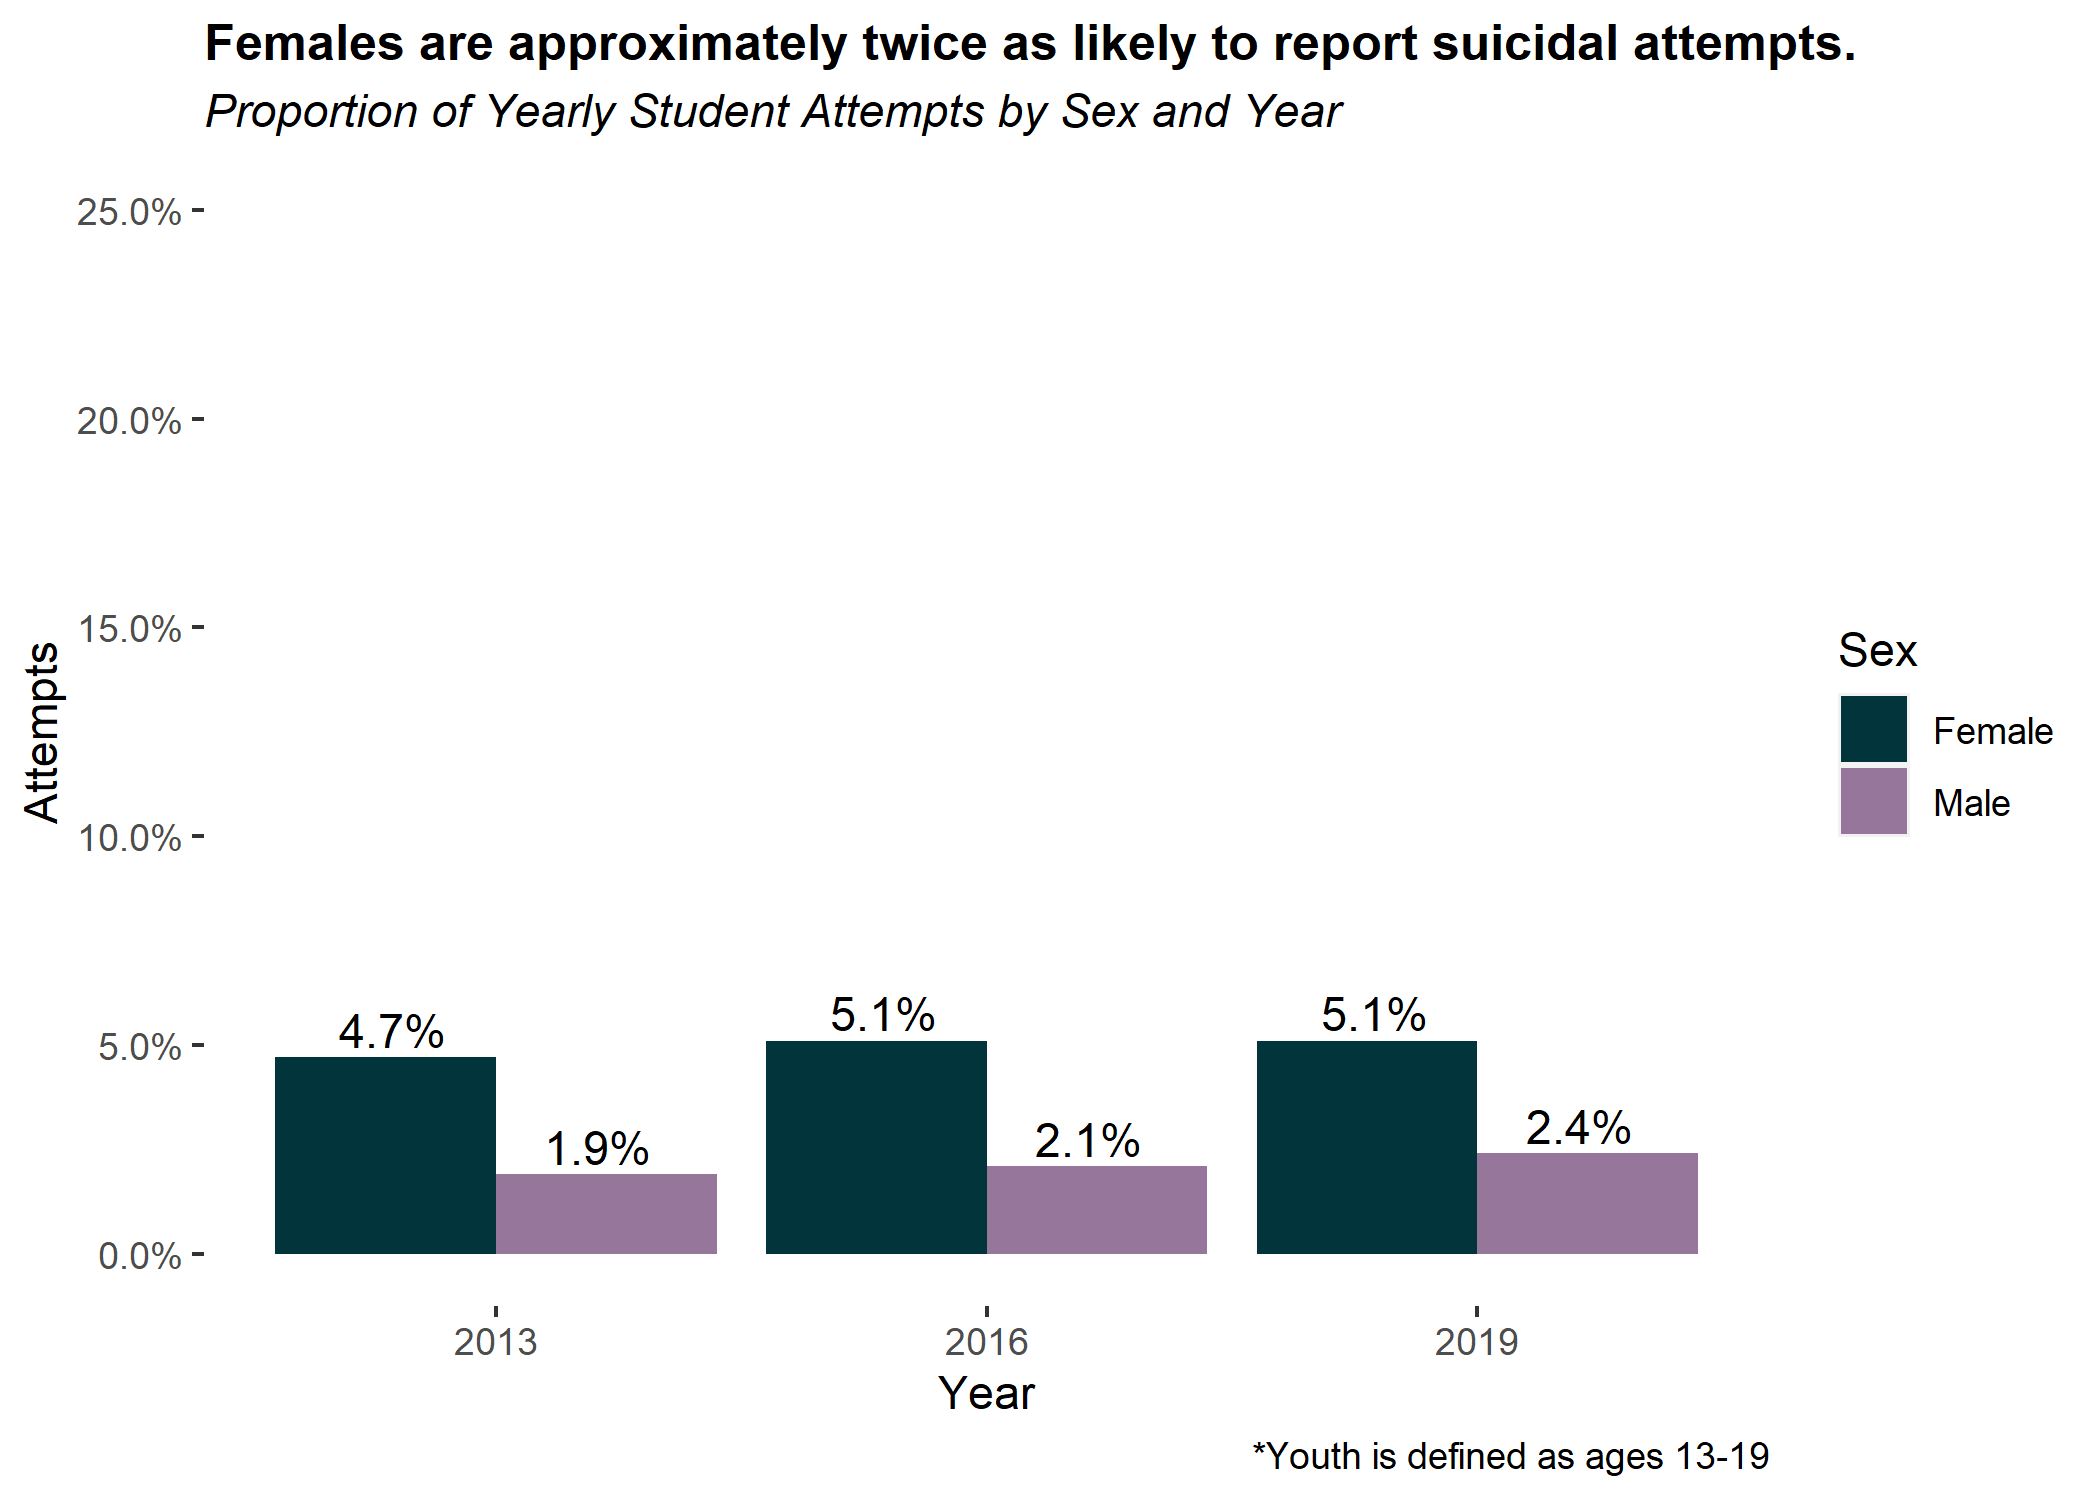 Proportion of suicide attempts by year. Females are approximately twice as likley to report suicidal attempts.